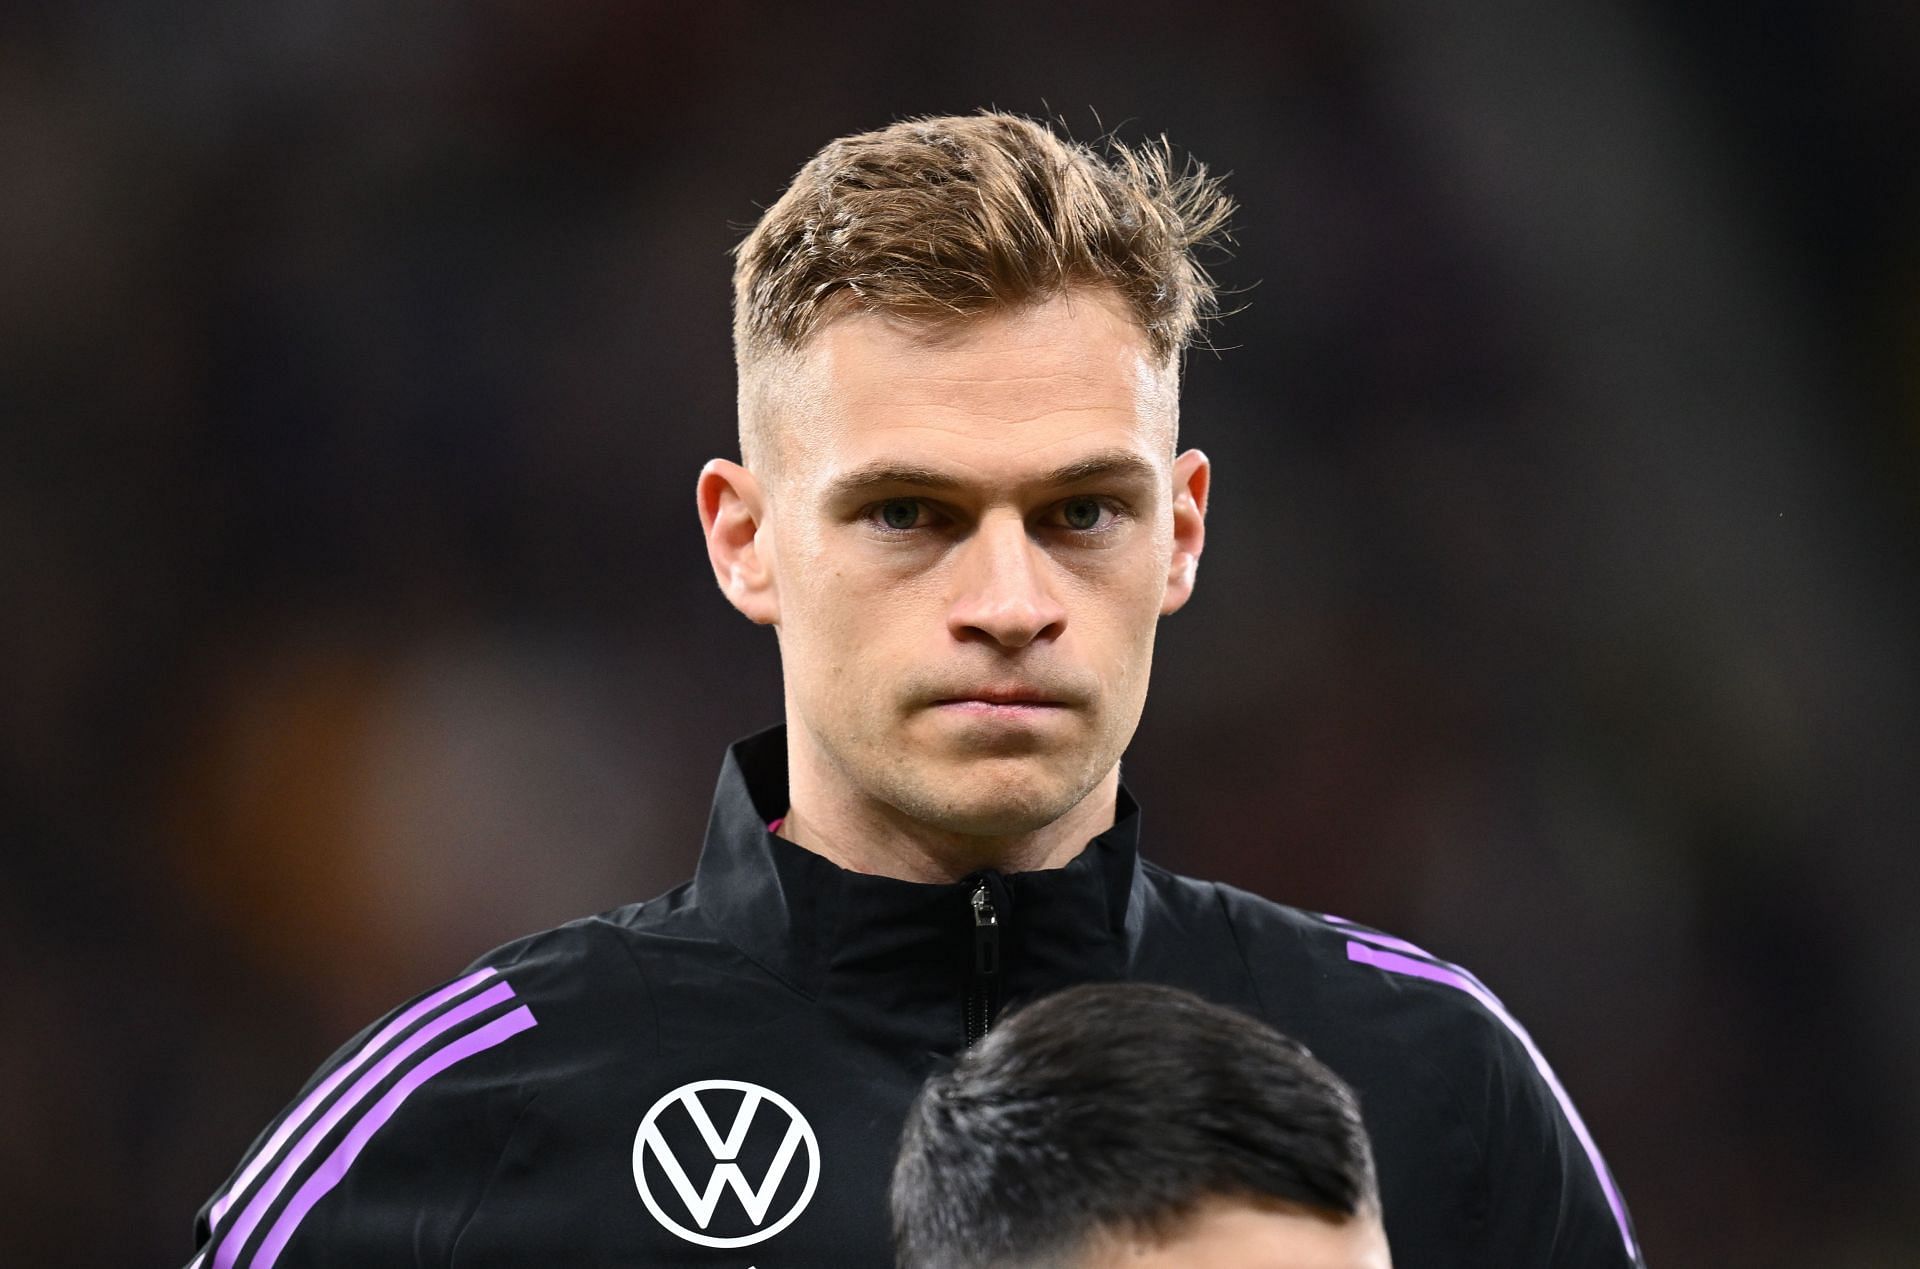 Kimmich could leave Bayern in the summer.